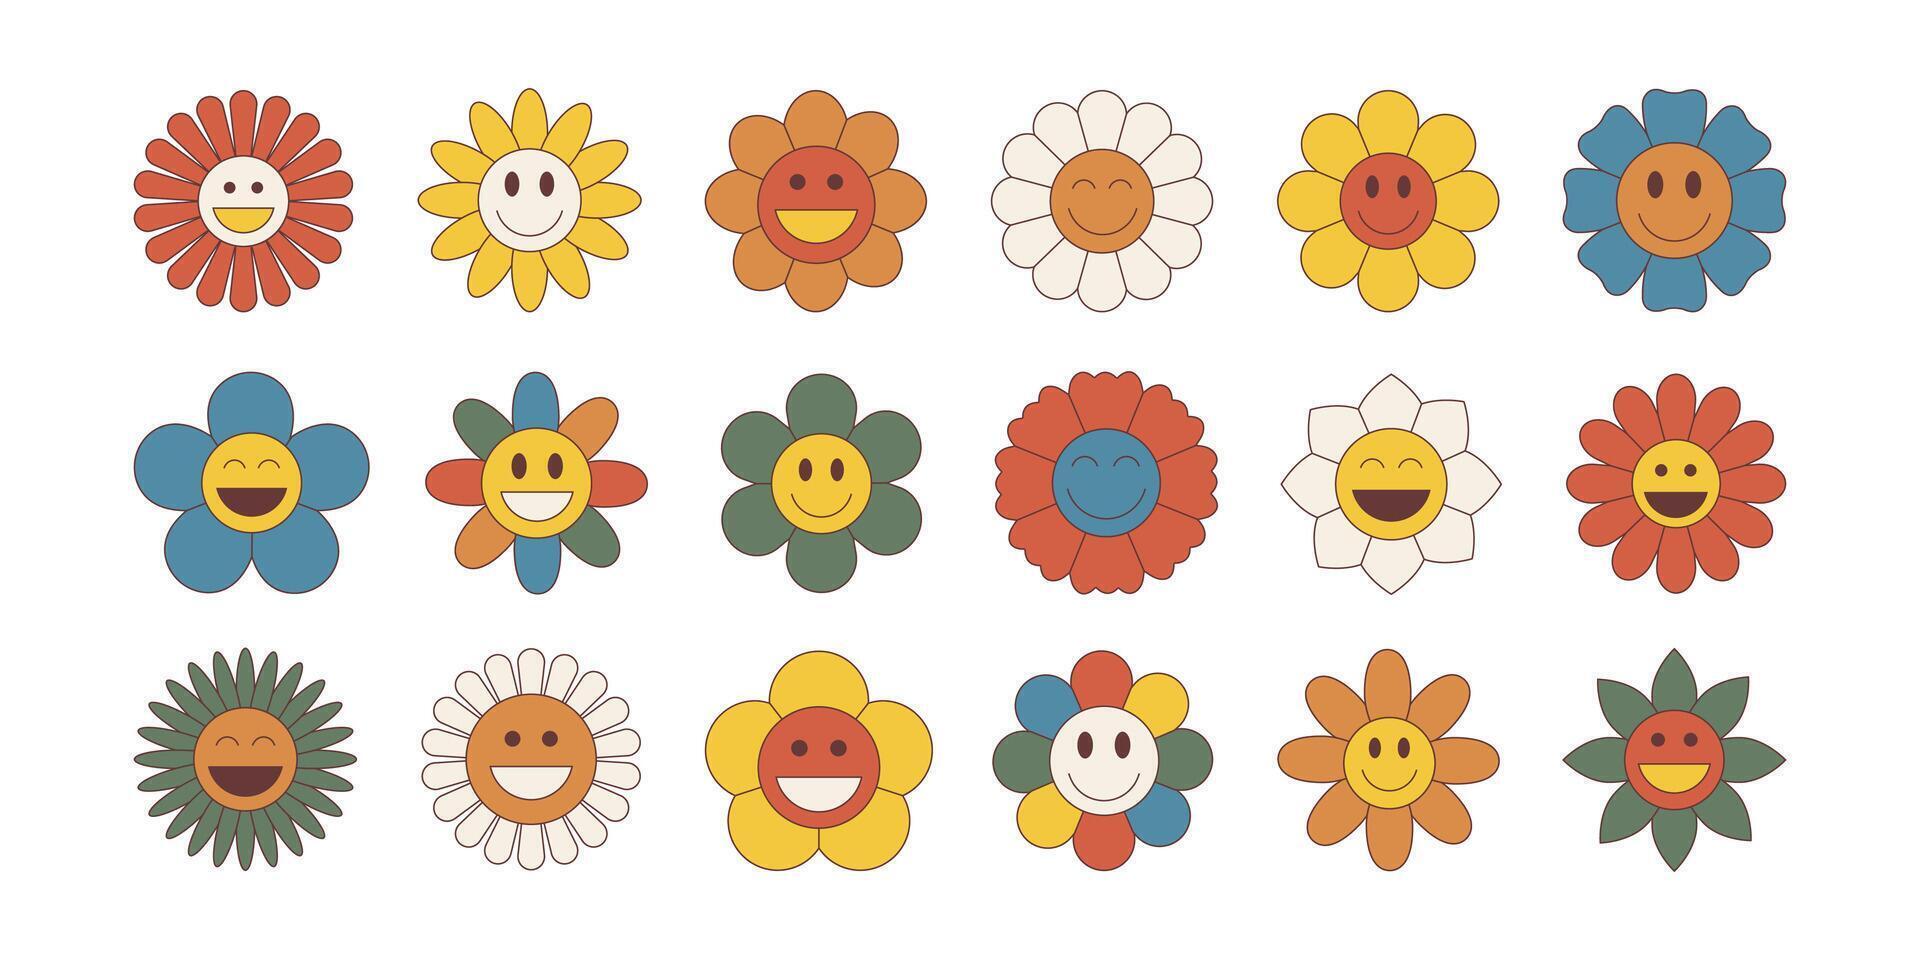 Groovy flower cartoon characters. Sticker pack in trendy retro trippy style. Hippie 60s, 70s style. vector